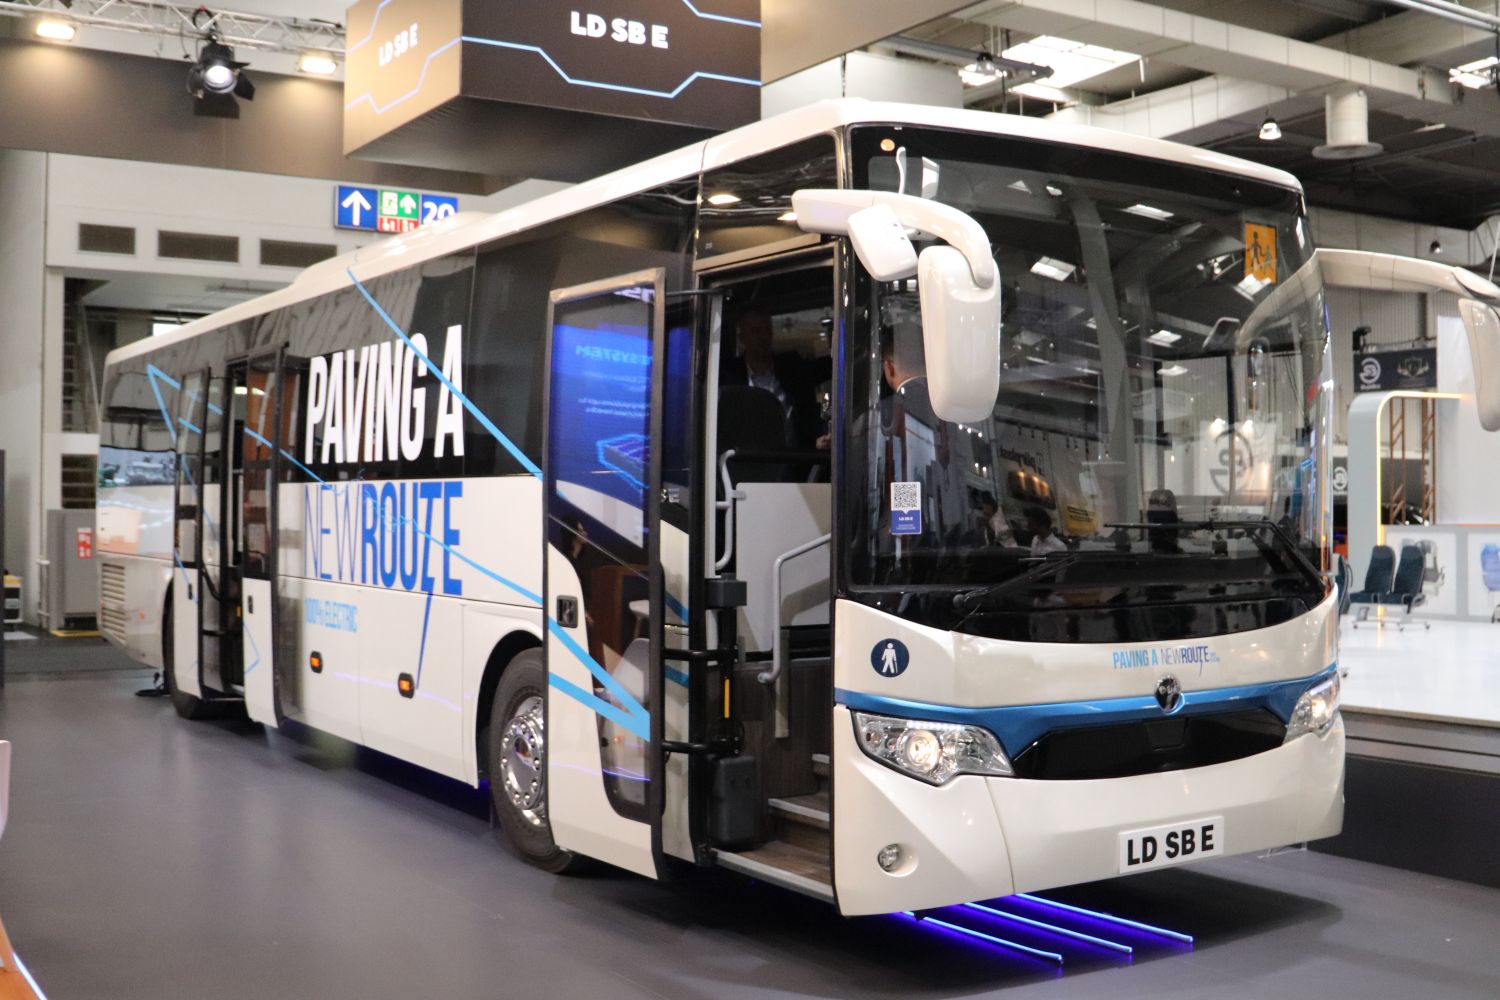 Temsa launched the electric LD SB E intercity bus